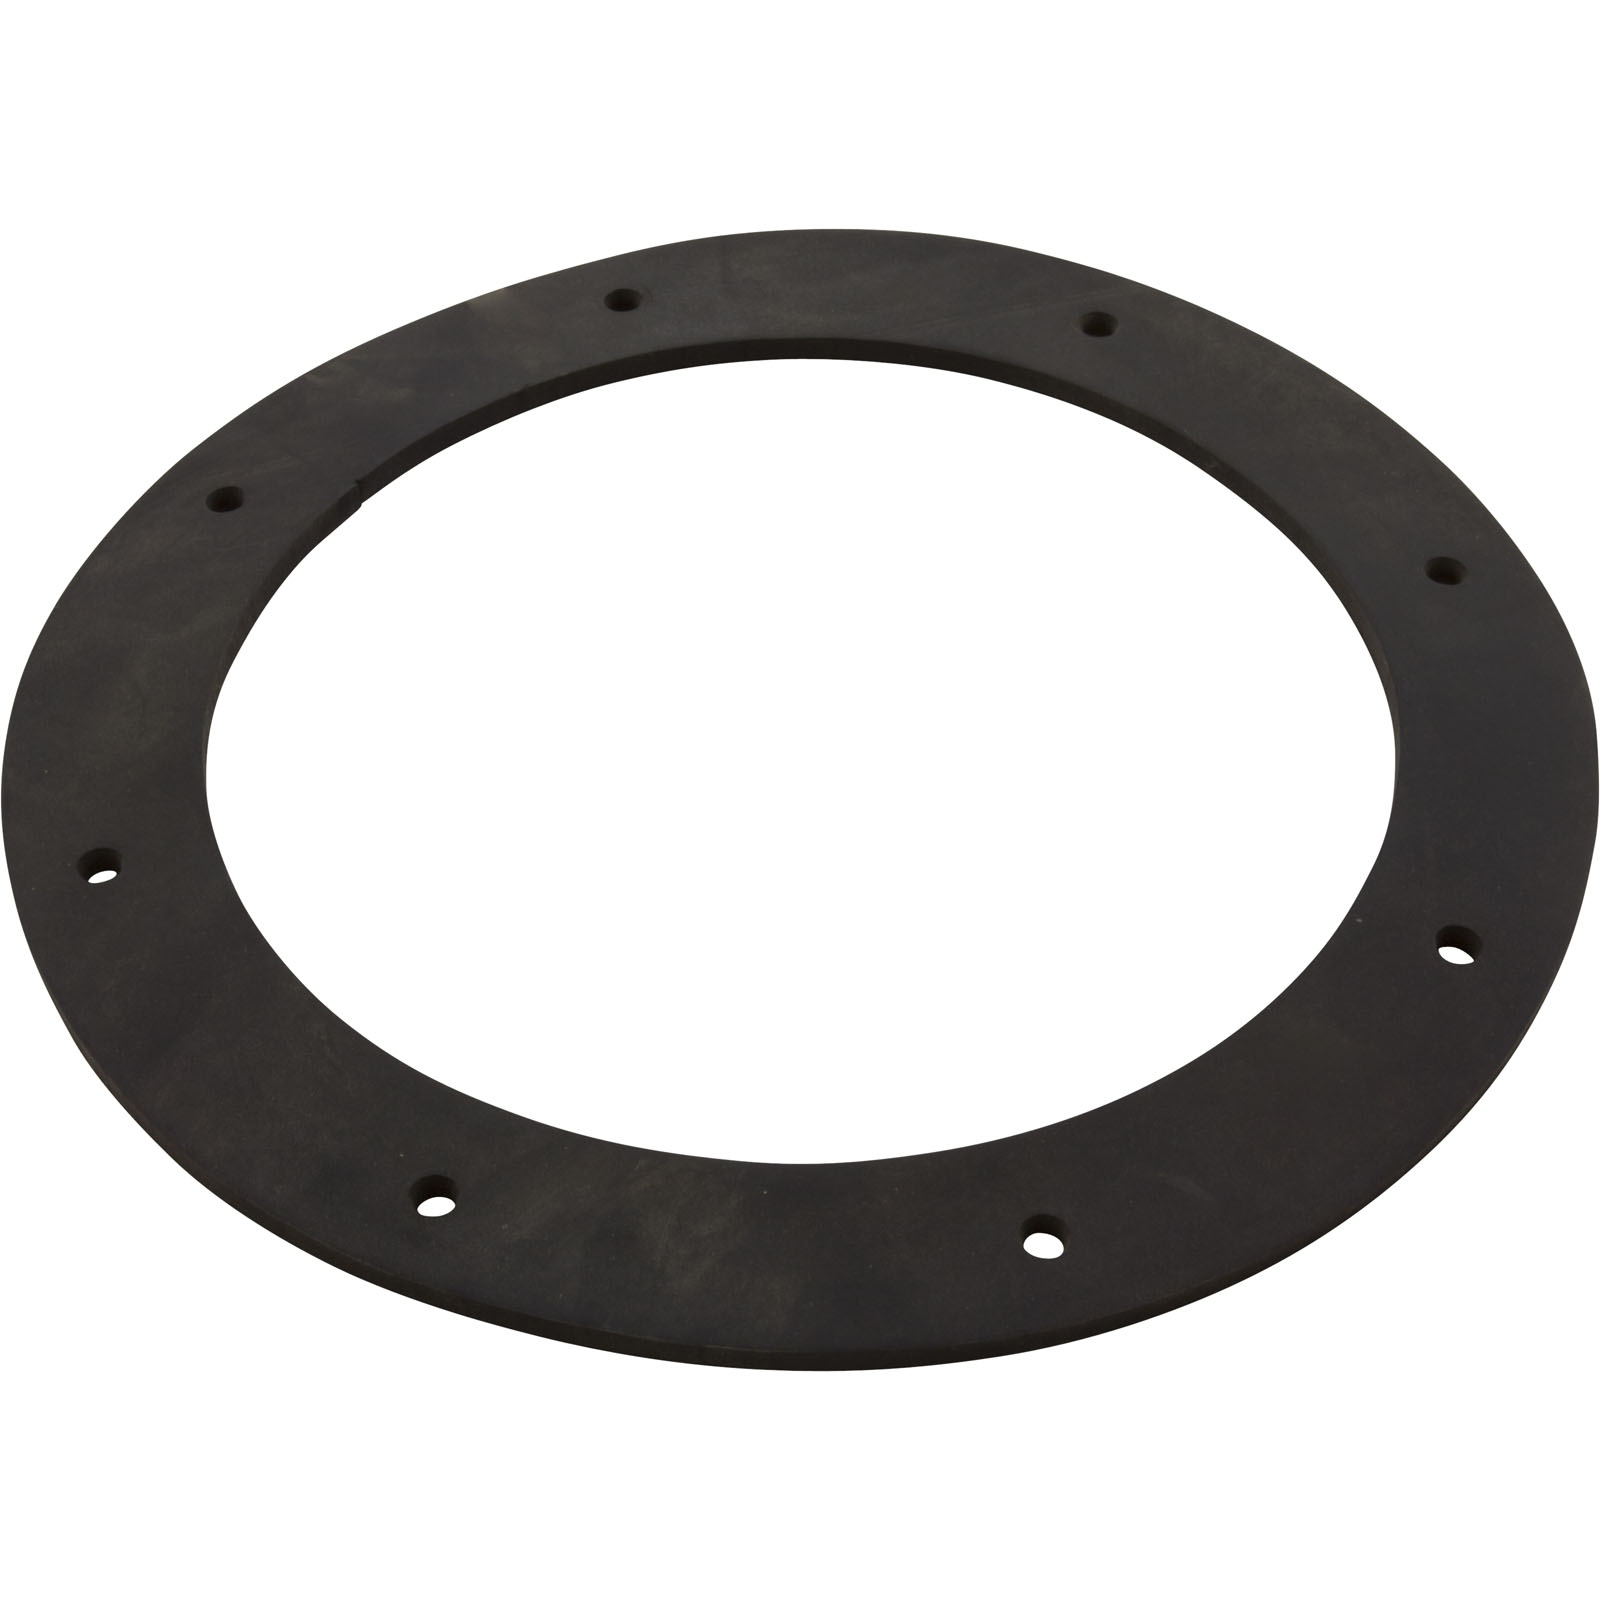 Picture of 2926999990 Gasket Speck AQ Tank Body